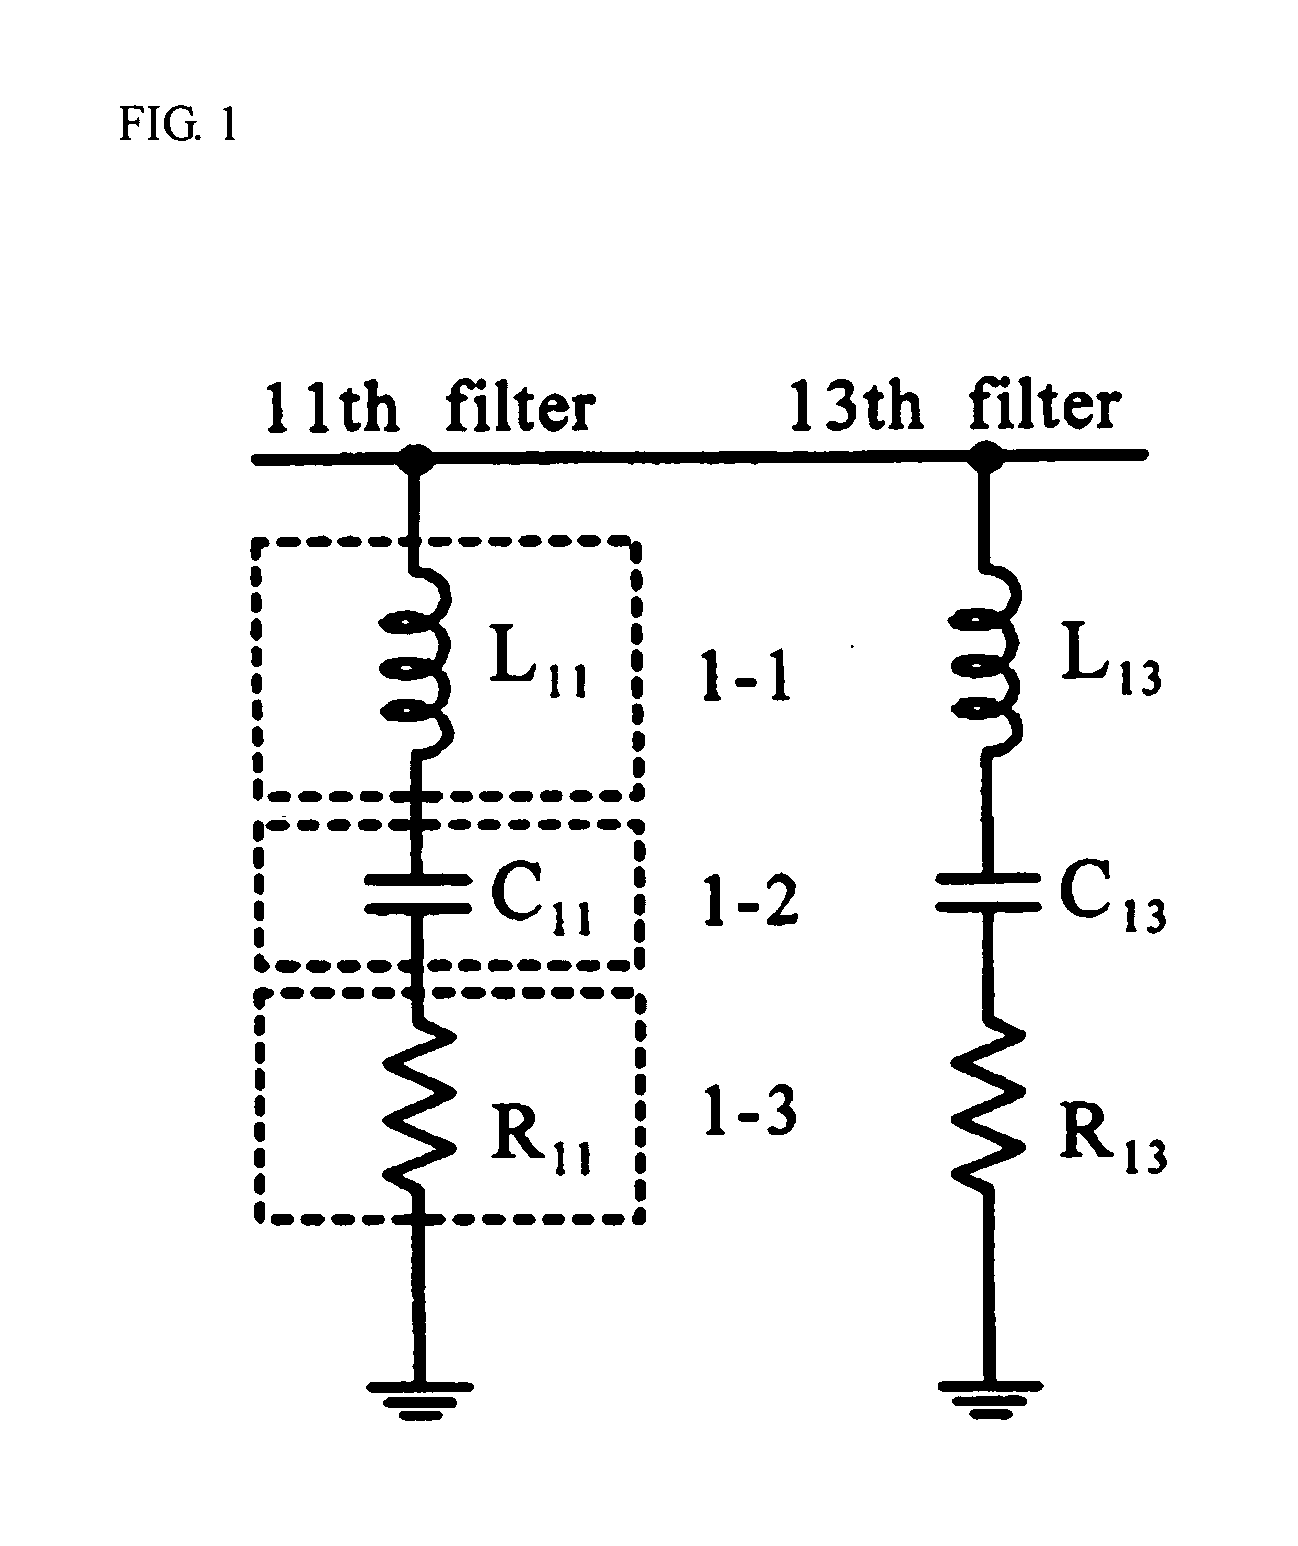 12th active filter capable of concurrently removing 11th and 13th harmonics